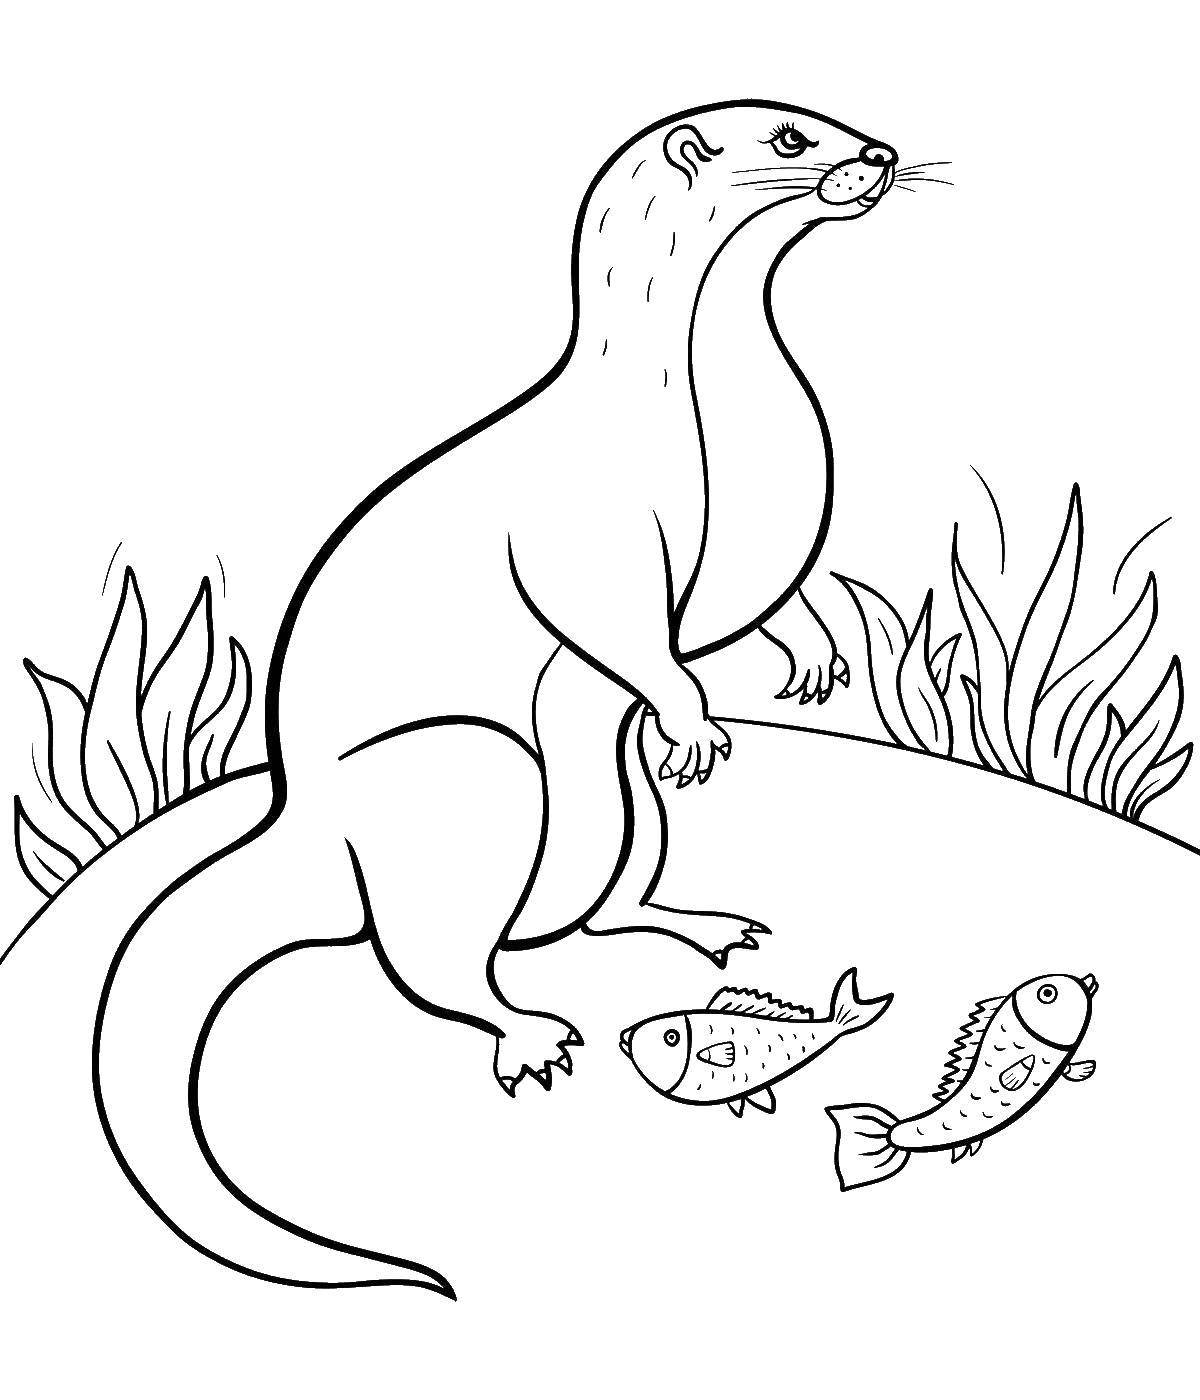 Coloring Vidracco. Category Animals. Tags:  Animals, otter.